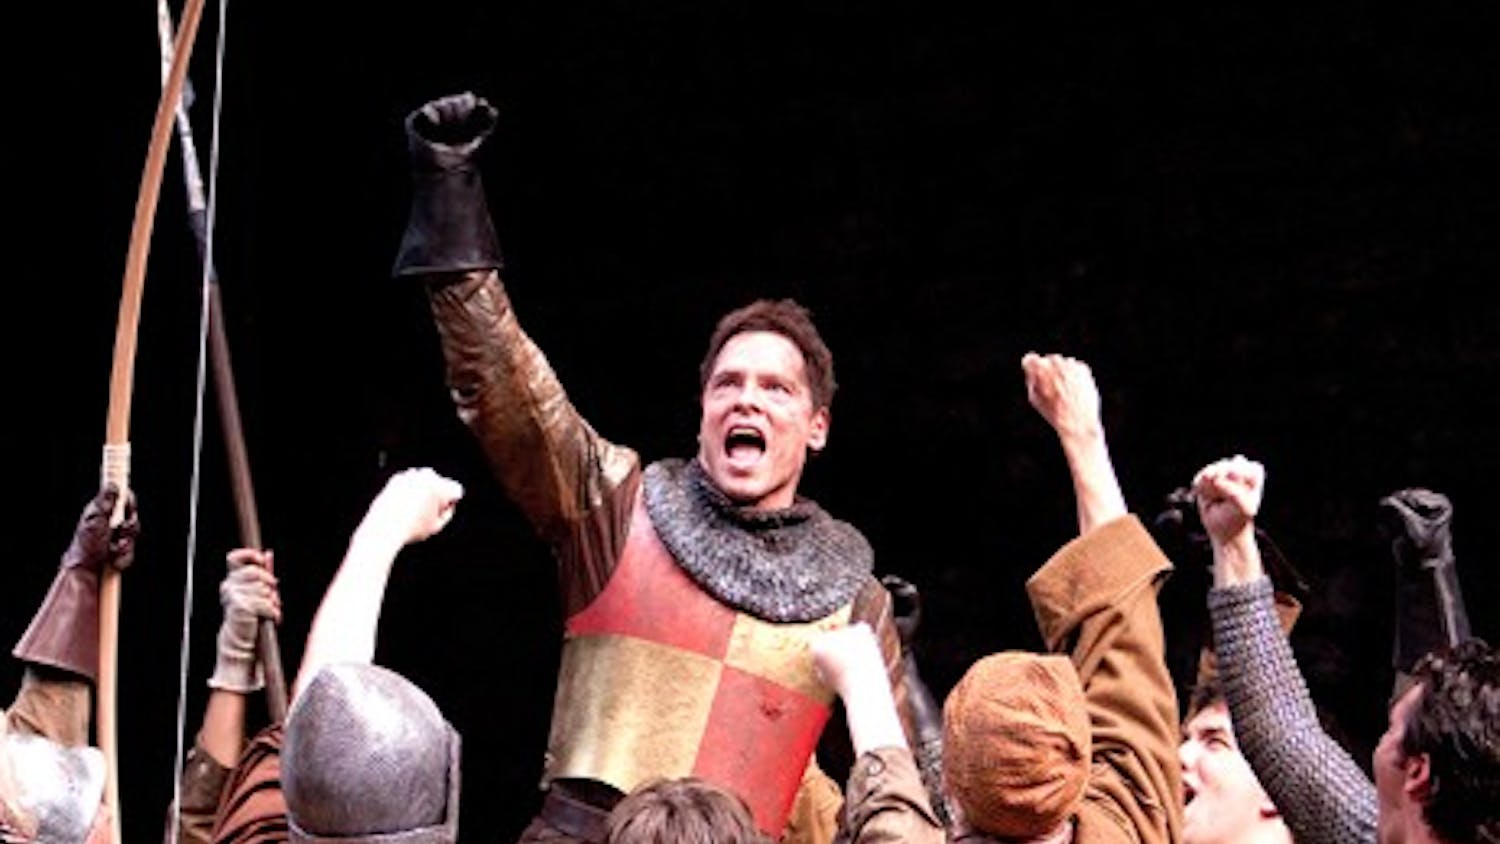 KINGS IN COURT â€” Michael Hayden plays the titular king in David Museâ€™s production of Henry V for the Shakespeare Theatre Company. Haydenâ€™s energetic performance gives the complex and intriguing plotline of the Bardâ€™s tale a significant human element, aided by Museâ€™s expert stagecraft. 